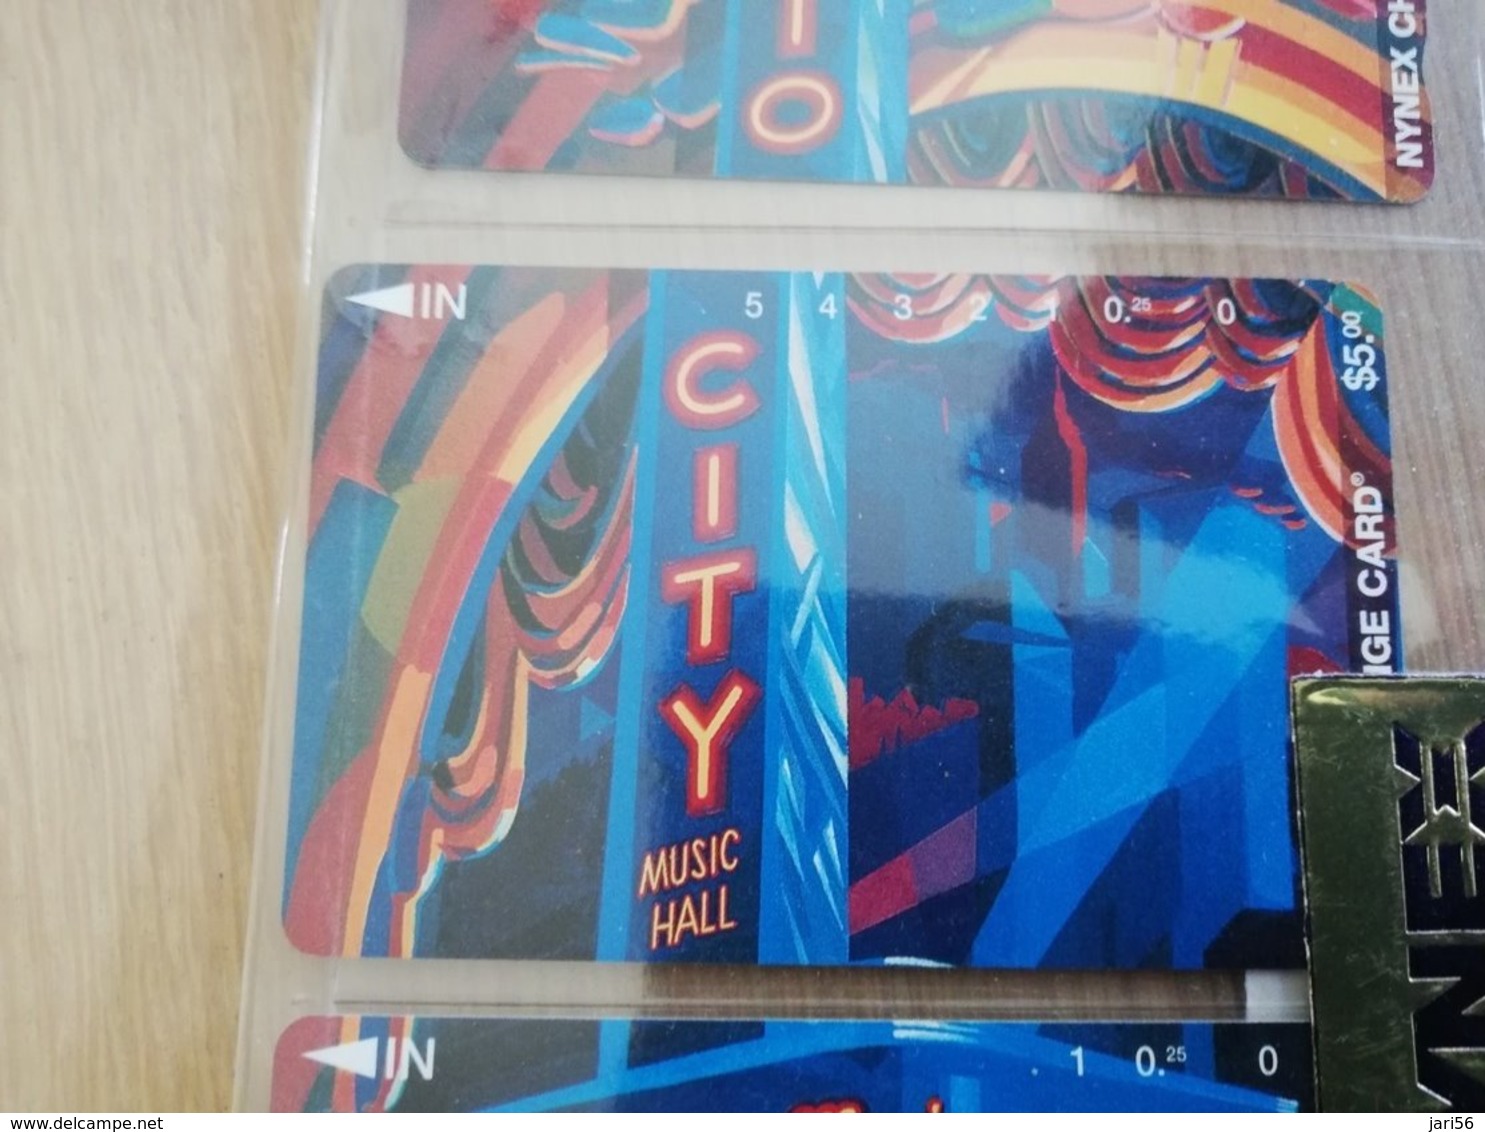 UNITED STATES  NYNEX  TELECARD WORLD 1995 RADIO CITY SEALED   3 CARDS   MINT   LIMITED EDITION ** 1397** - Collections